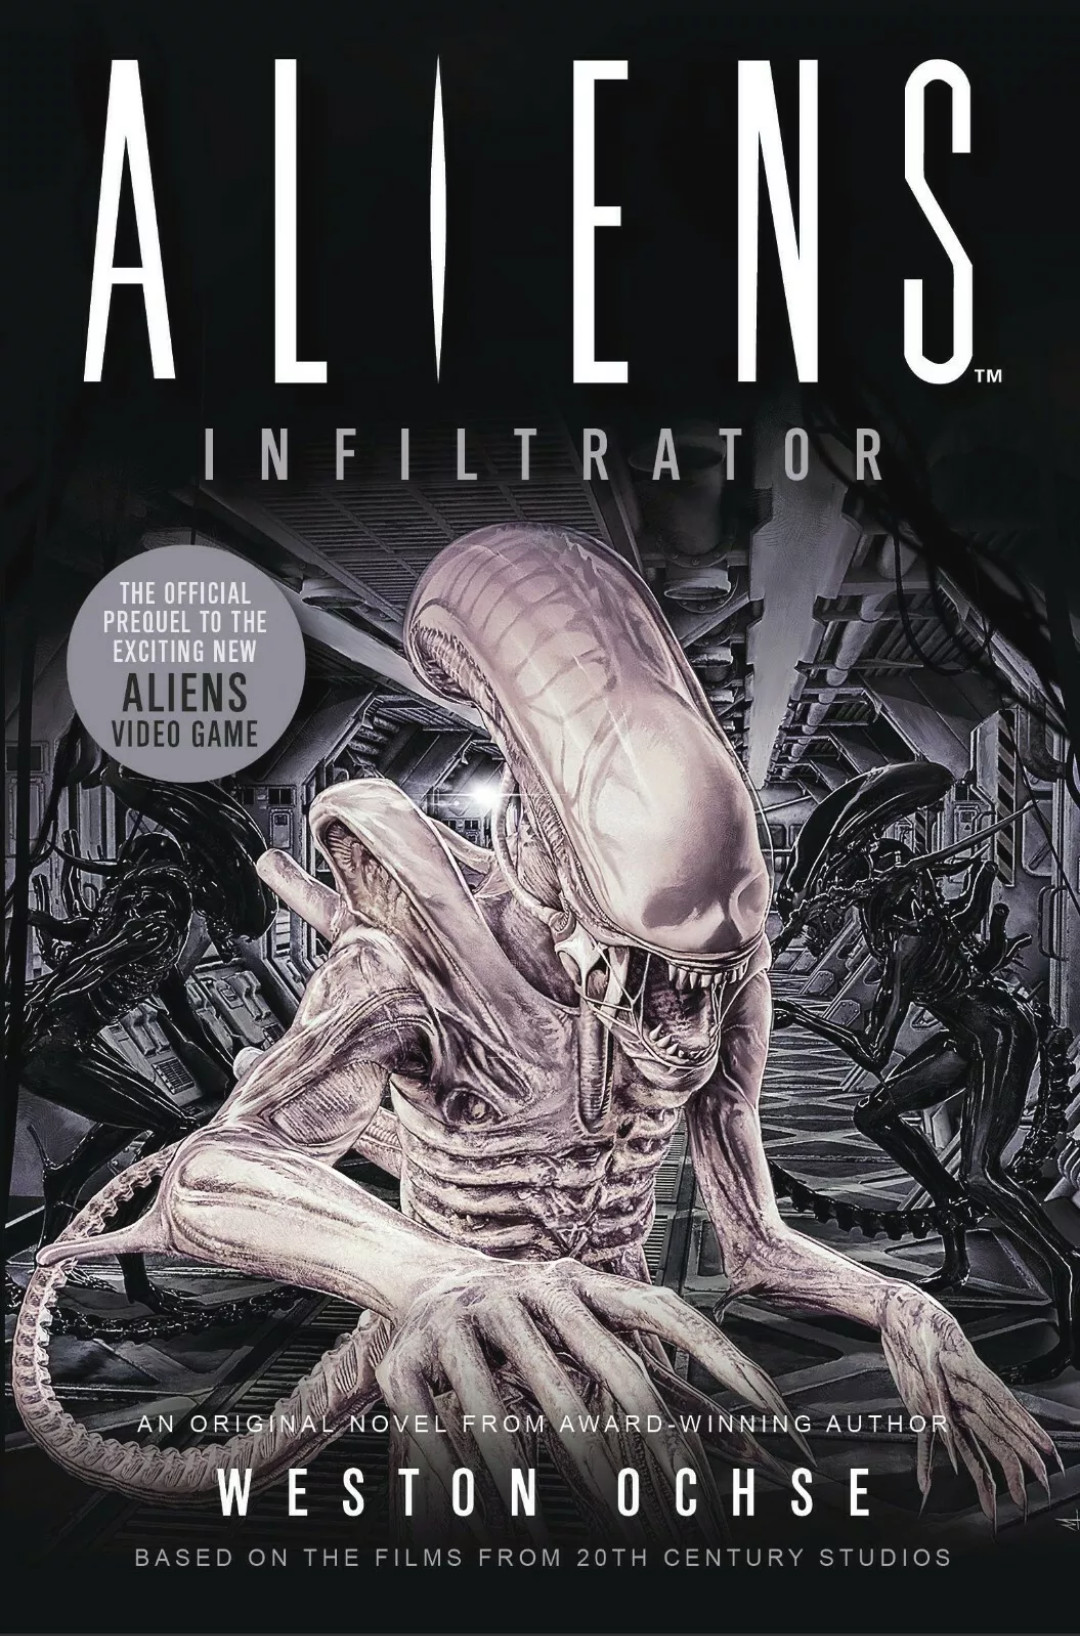 The cover of Weston Ochse’s Aliens: Infiltrator, with a pale white Xenomorph against a monochrome background featuring other Xenomorphs.